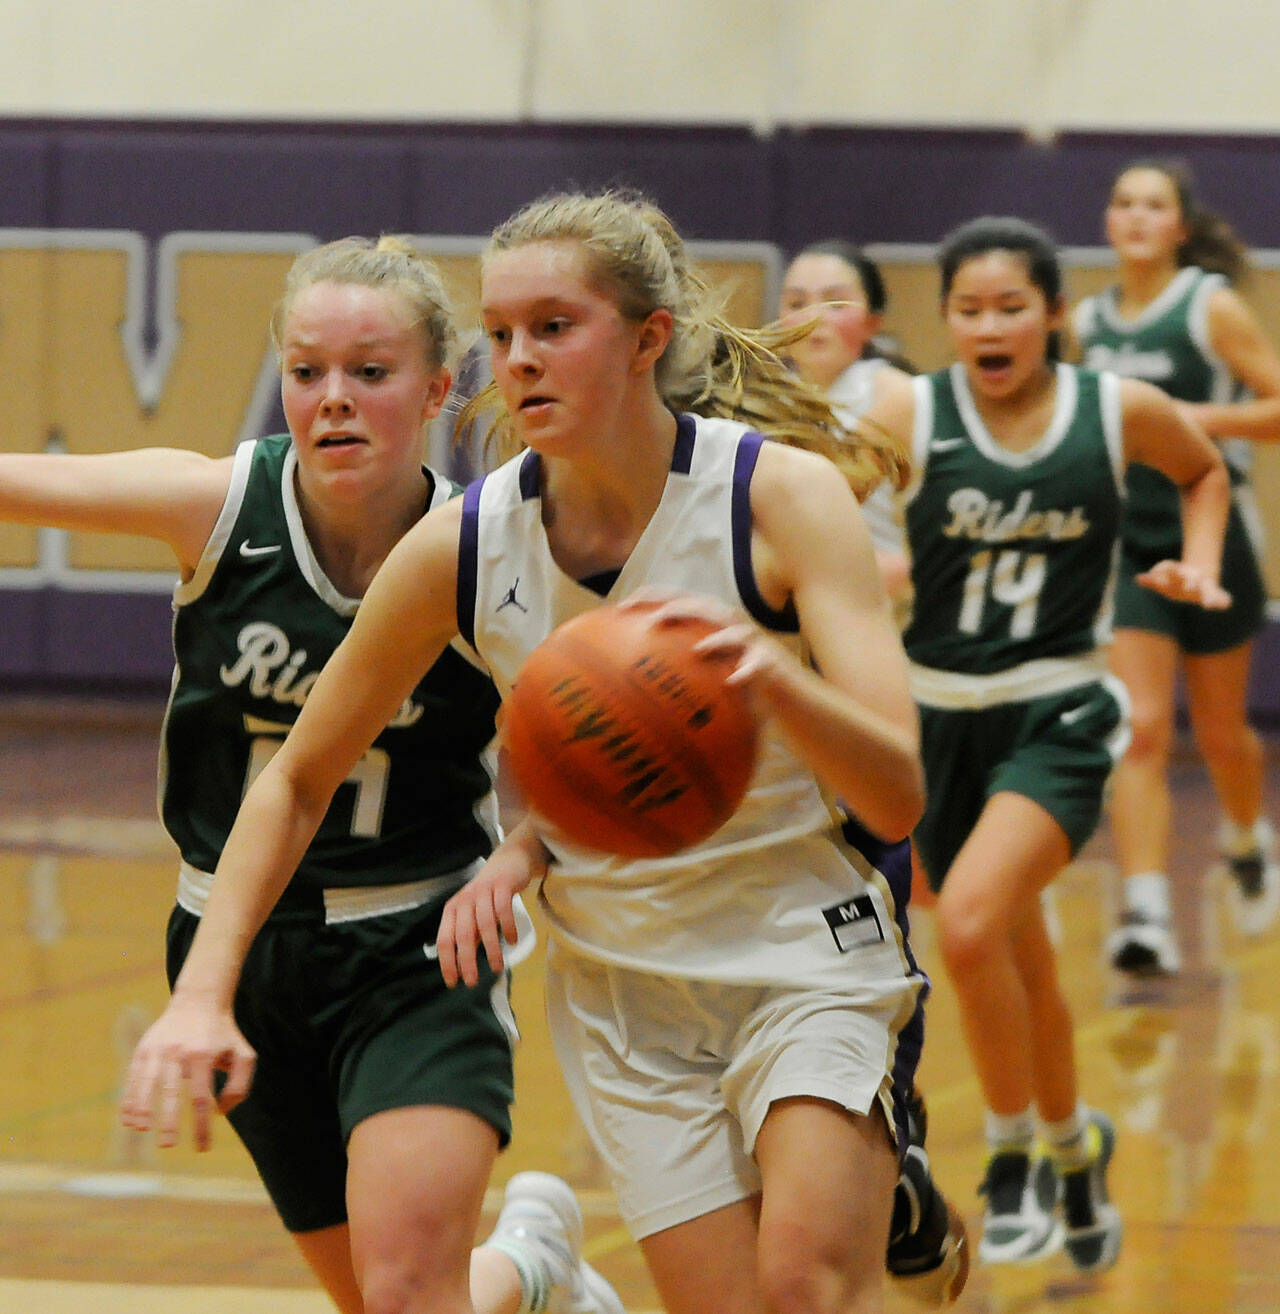 Sequim’s Jolene Vaara, right, helps lead the Wolves to a 60-55 win over rival Port Angeles on Jan. 11. Vaara scored a game-high 31 points, 21 in the second half.